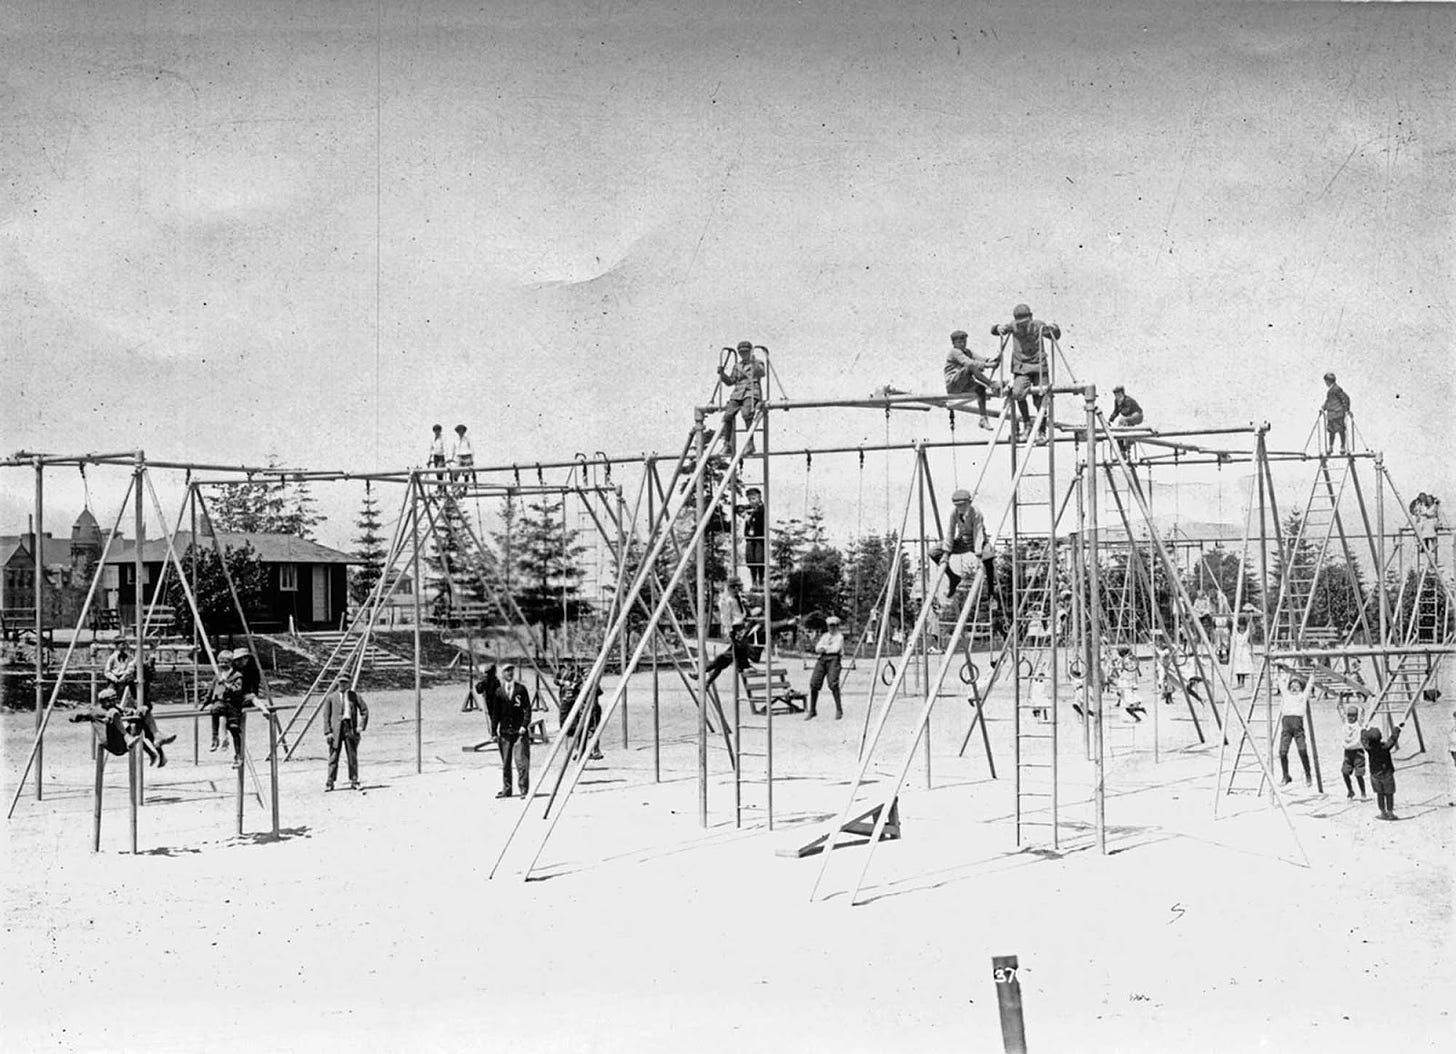 Hiawatha Playground, 1912 - from “The dangerous playgrounds of 1900s through vintage photographs”